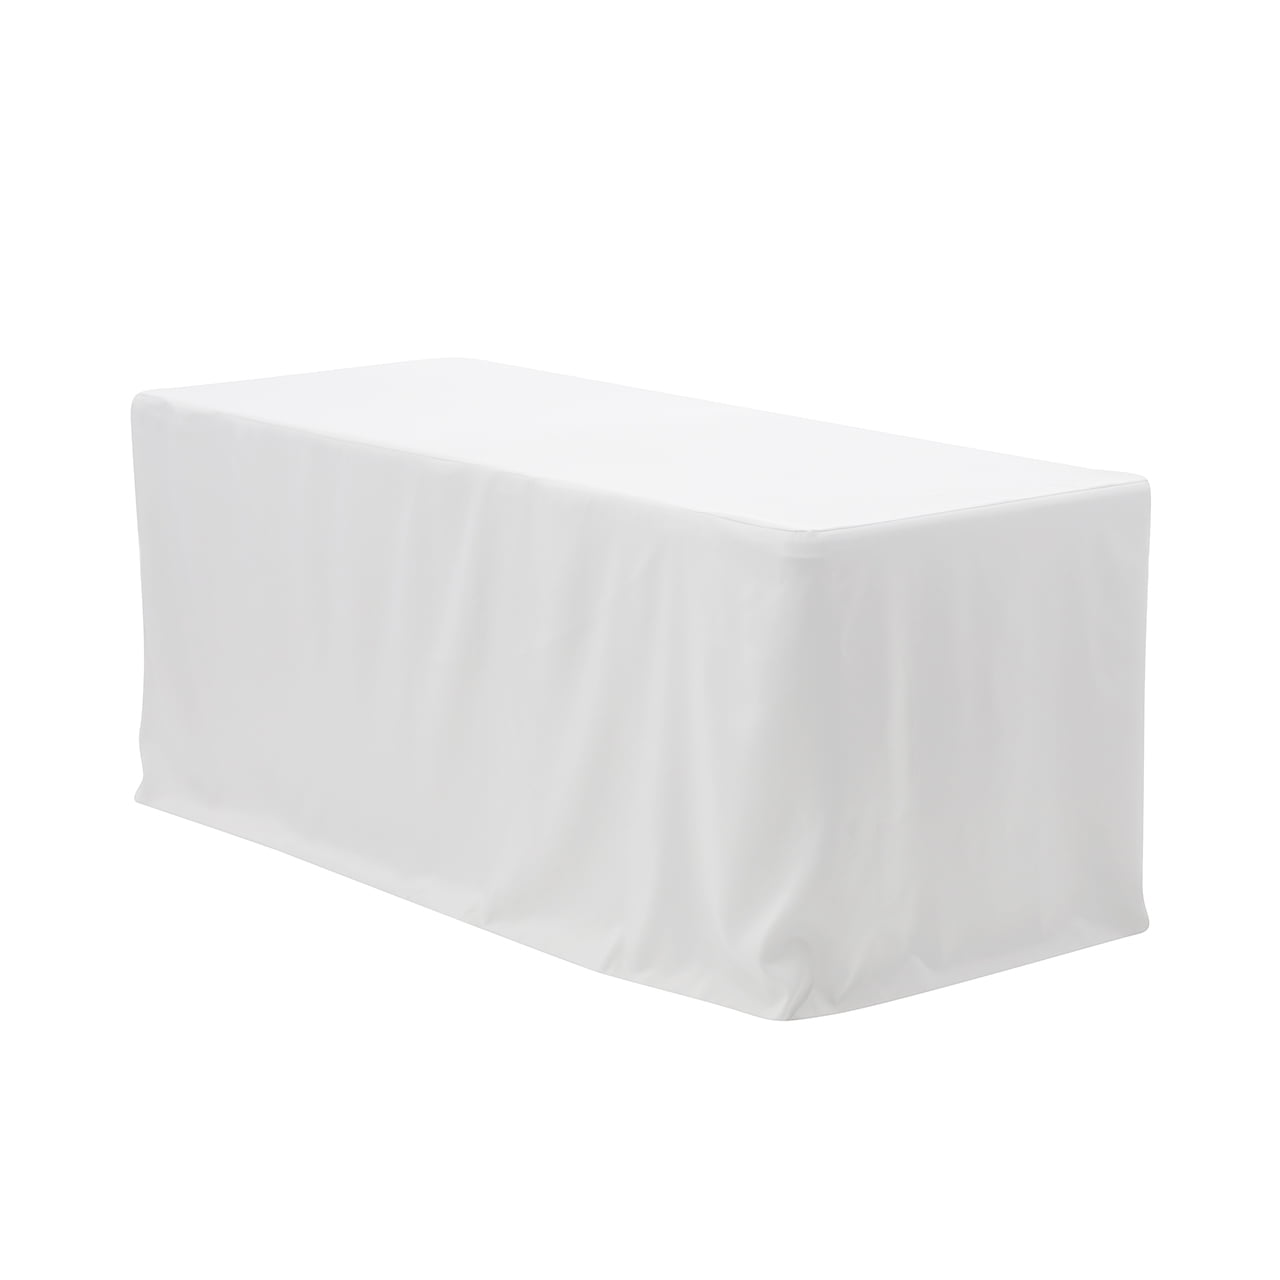 6 Ft Fitted Polyester Tablecloth, What Size Tablecloth Do I Need For A 6 Foot Rectangular Table